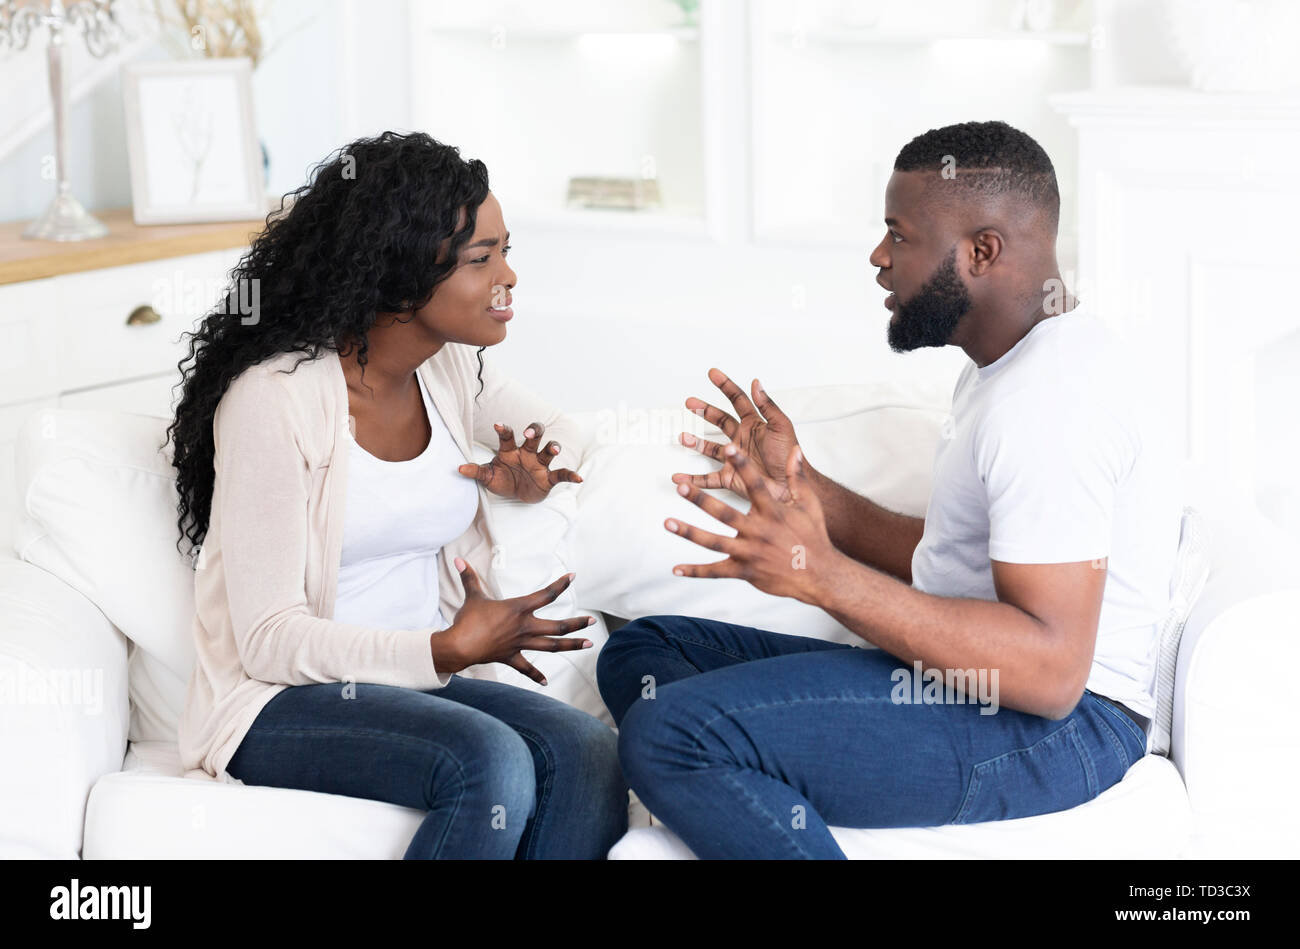 Man and woman quarreling, gesticulating and shouting at each other Stock Photo